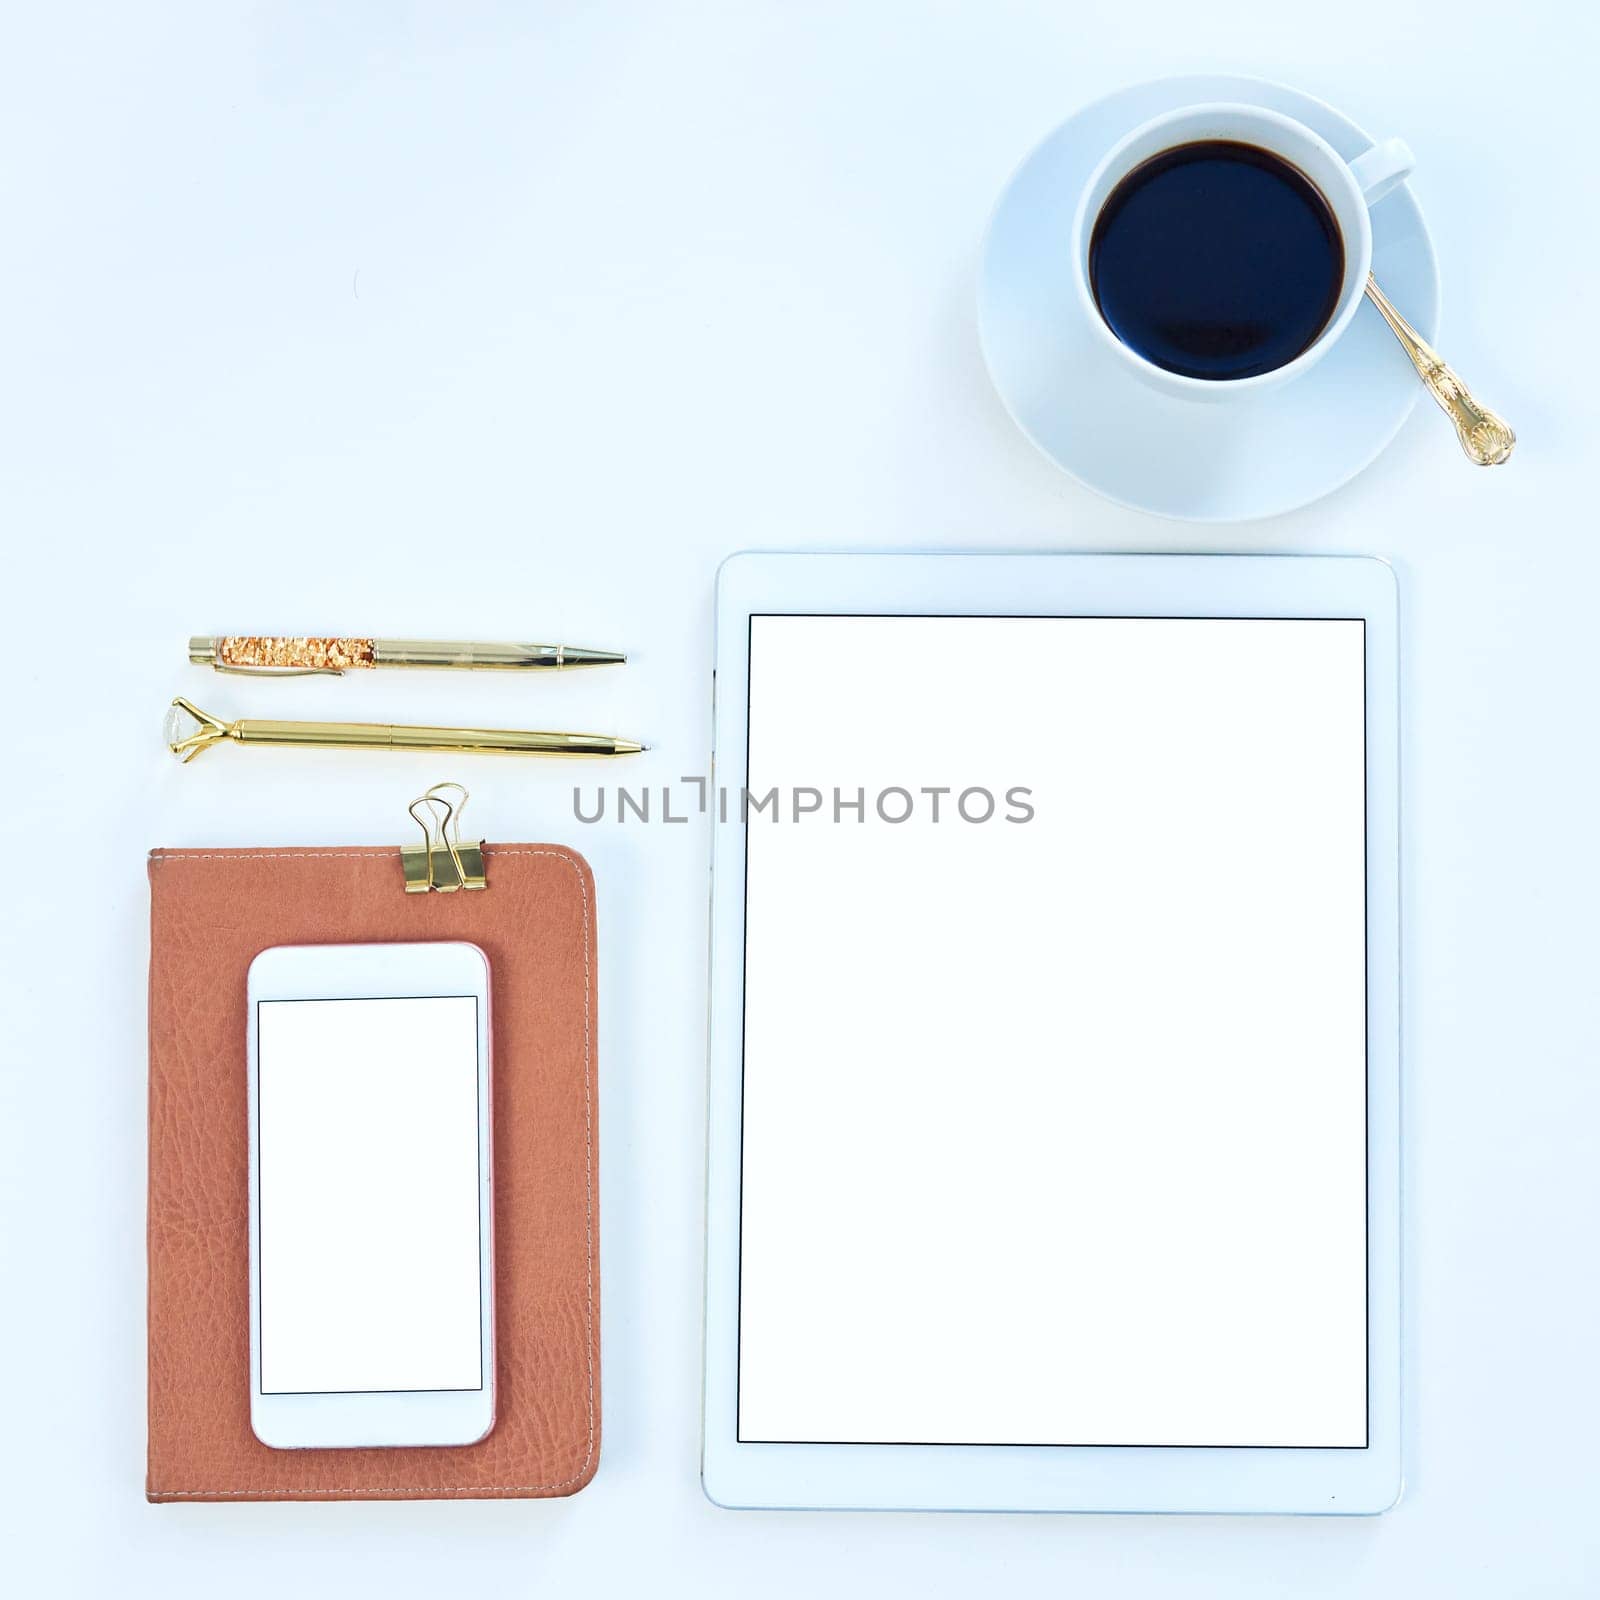 Tablet, smartphone and screen with coffee or above, creative workspace and mockup for online content creation. Blog, pen and technology aesthetic for social media, website and internet display.